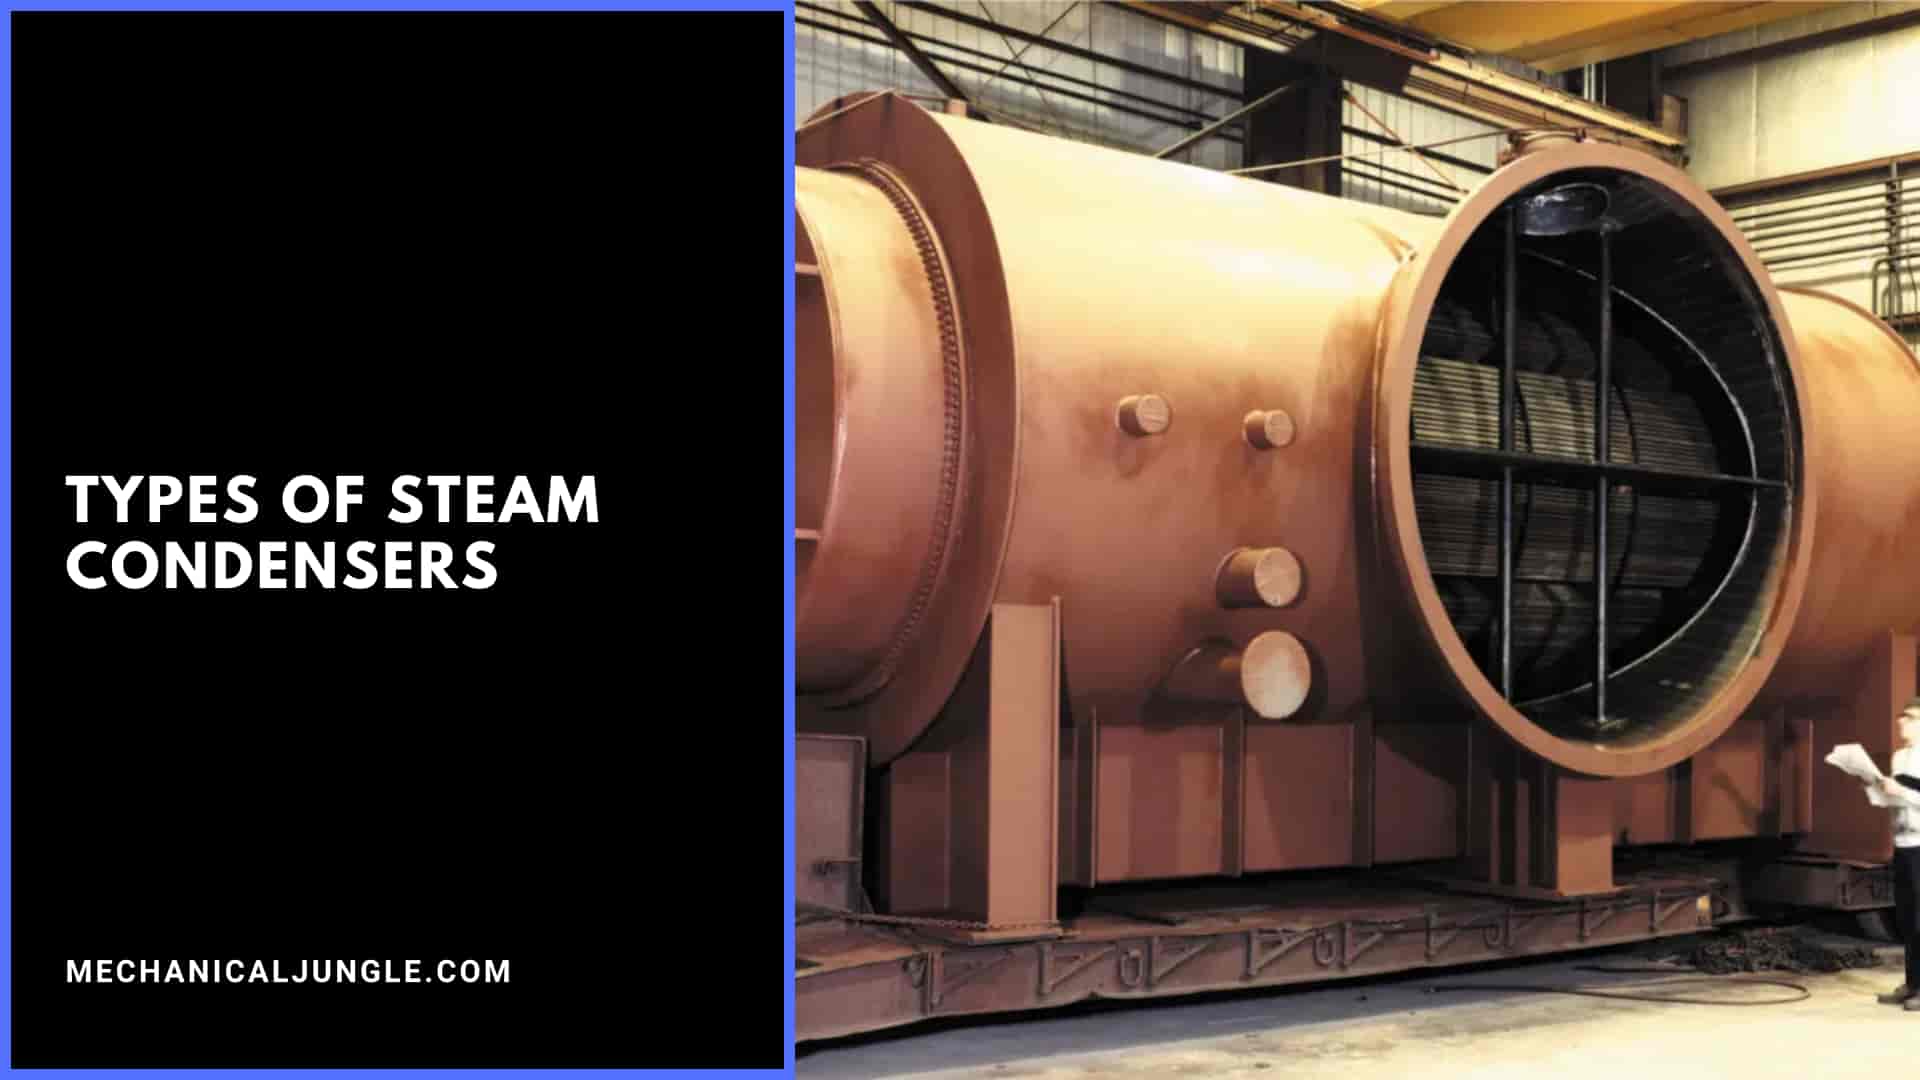 Types of Steam Condensers